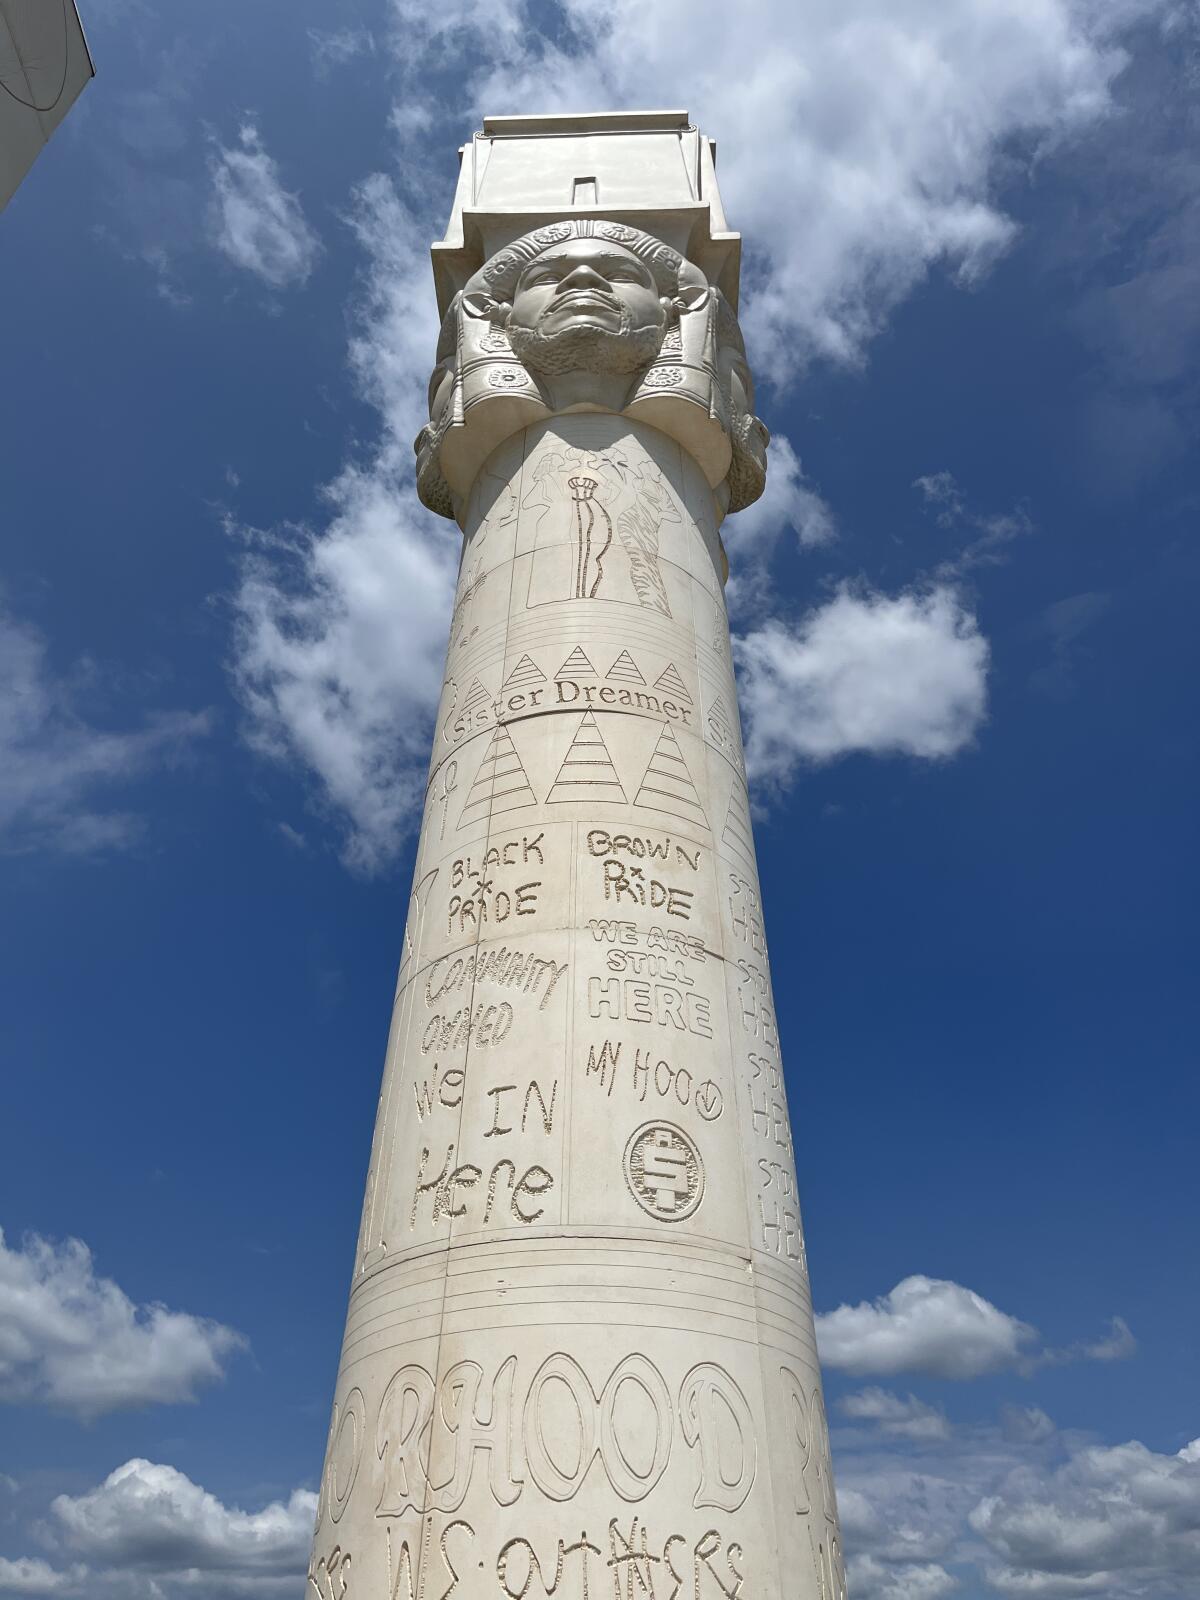 A view of an Egyptian-style column is ringed by carvings of the faces of Black people at the crown